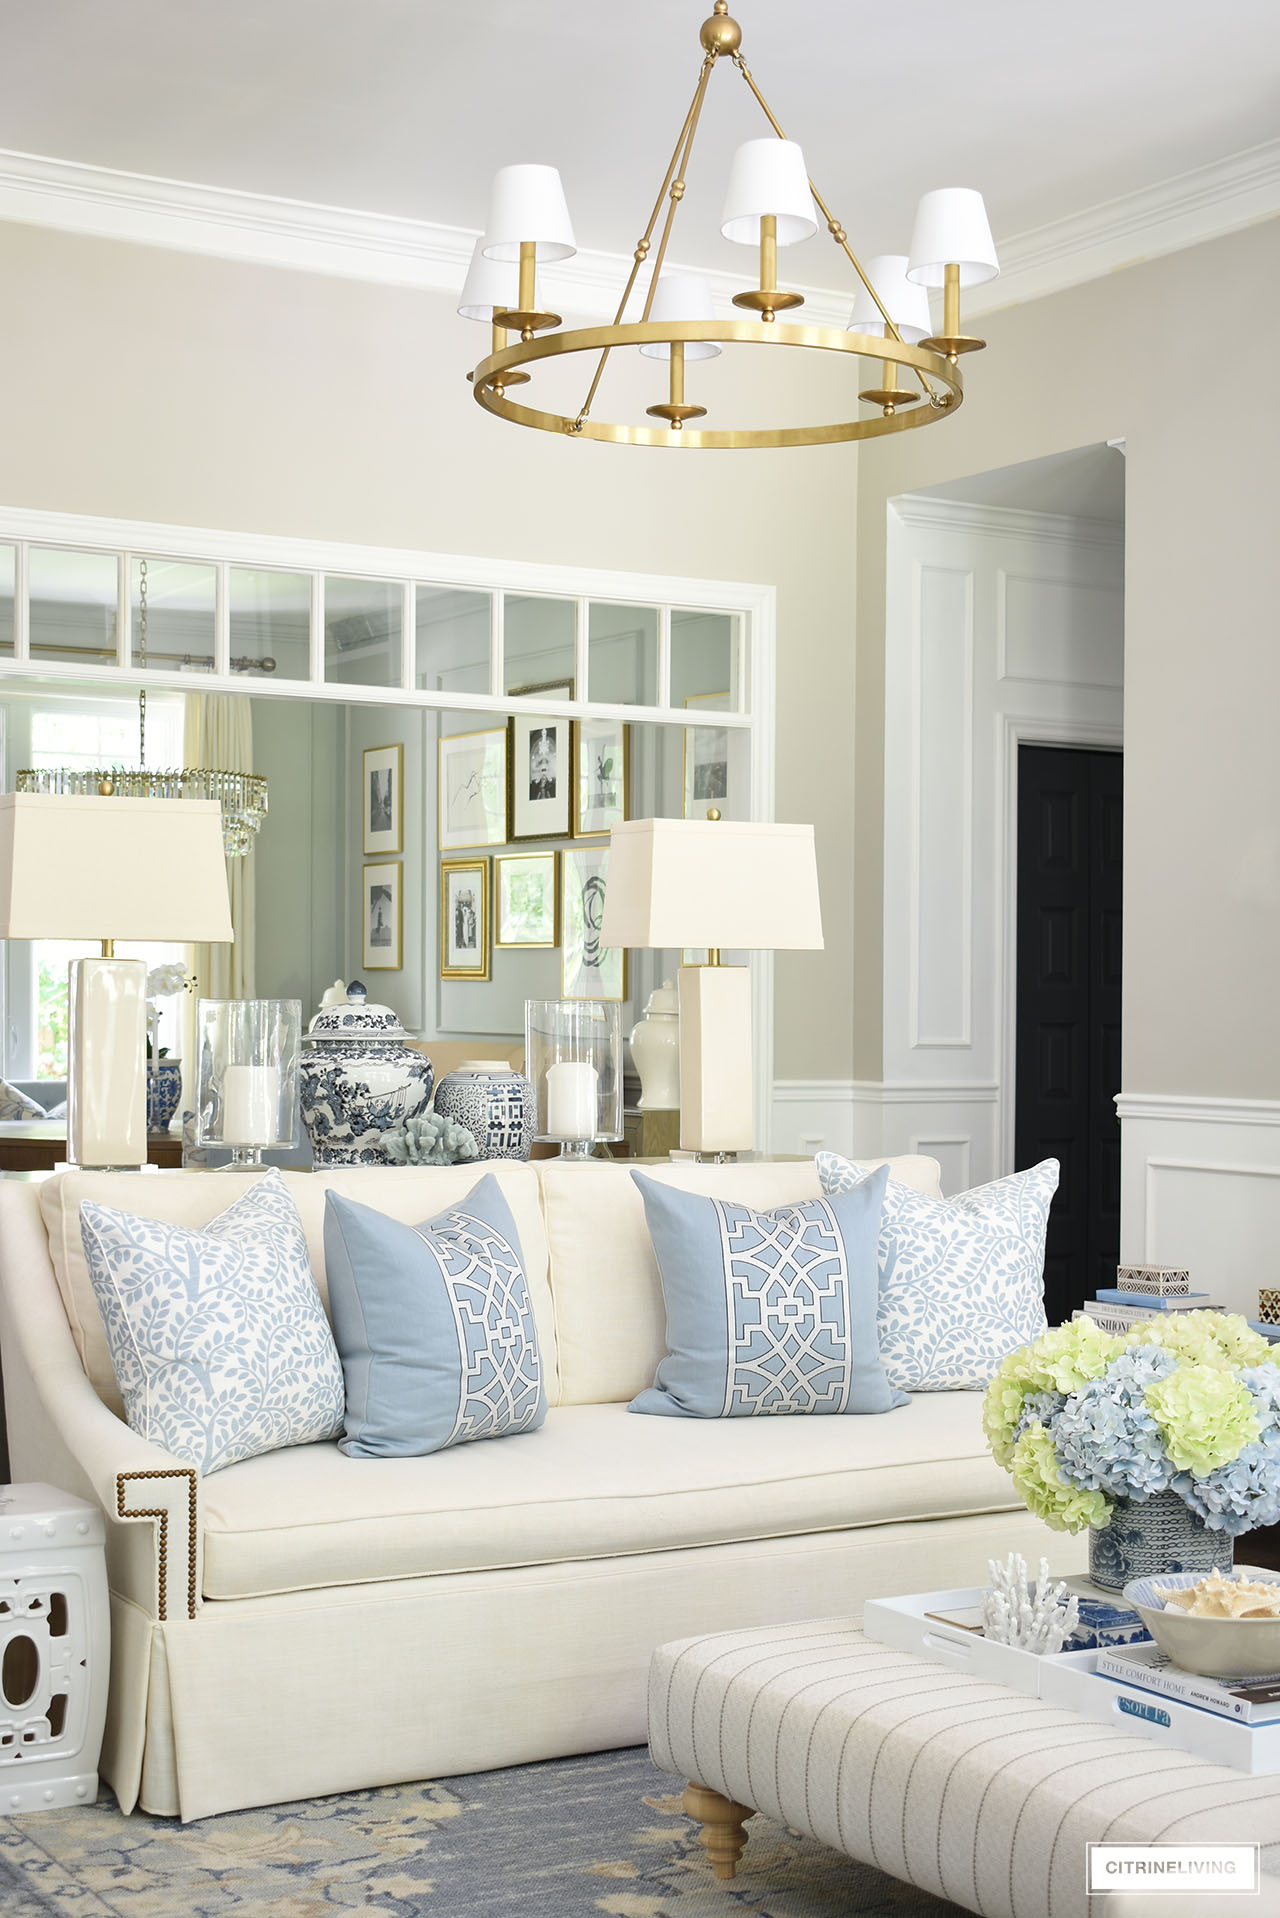 Living room styled with summer accents in light blue and white,  coastal accessories, designer pillows, ginger jars and hydrangeas.